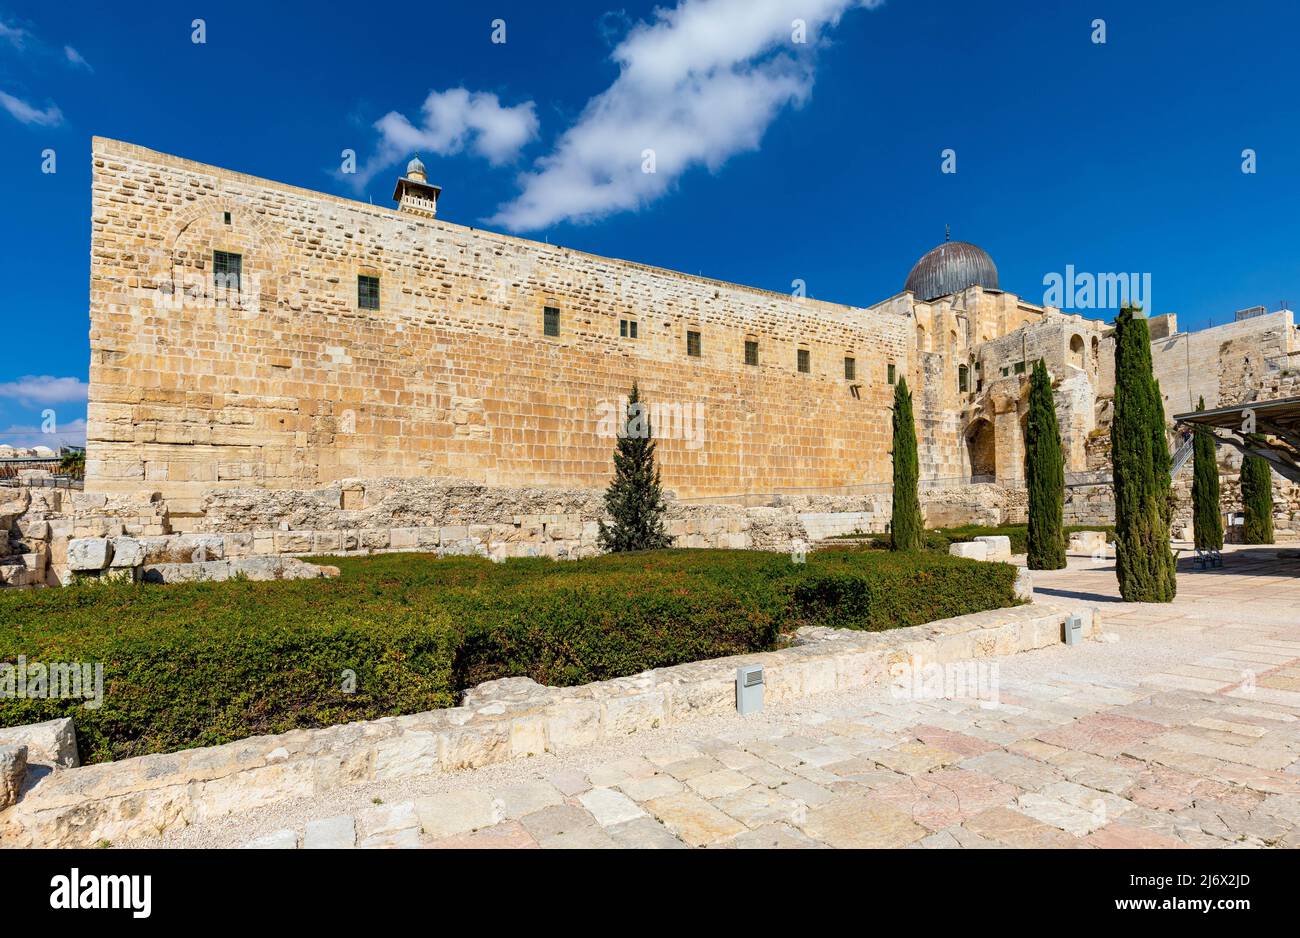 Jerusalem, Israel - October 13, 2017: Umayyad Palace Garden archeological park at south wall of Temple Mount and Al-Aqsa Mosque in Jerusalem Old City Stock Photo